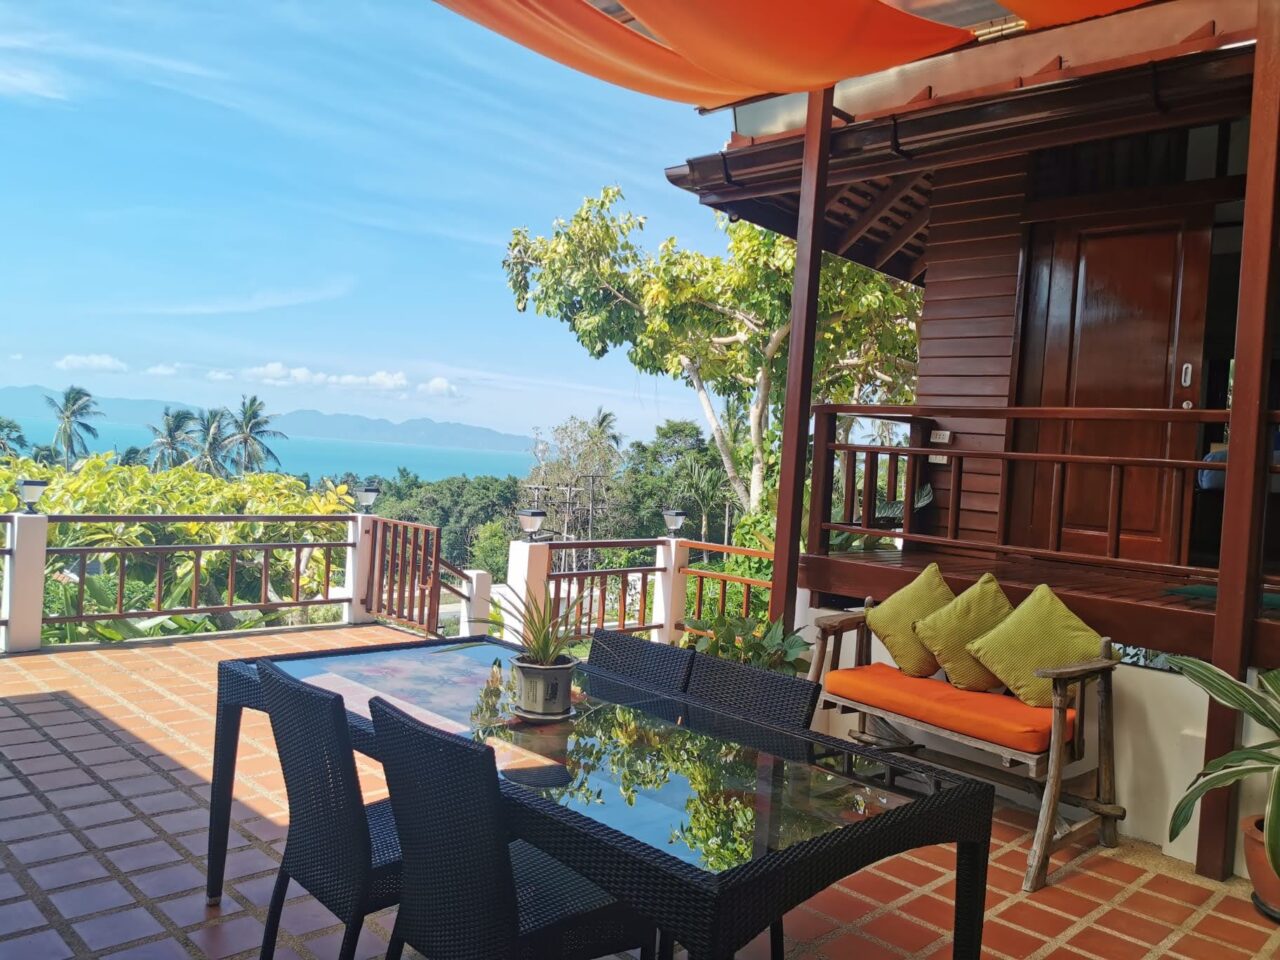 Property id 629v. 2 bedroom sea view villa with big   beautiful closed garden just  800m to Bang Po beach.